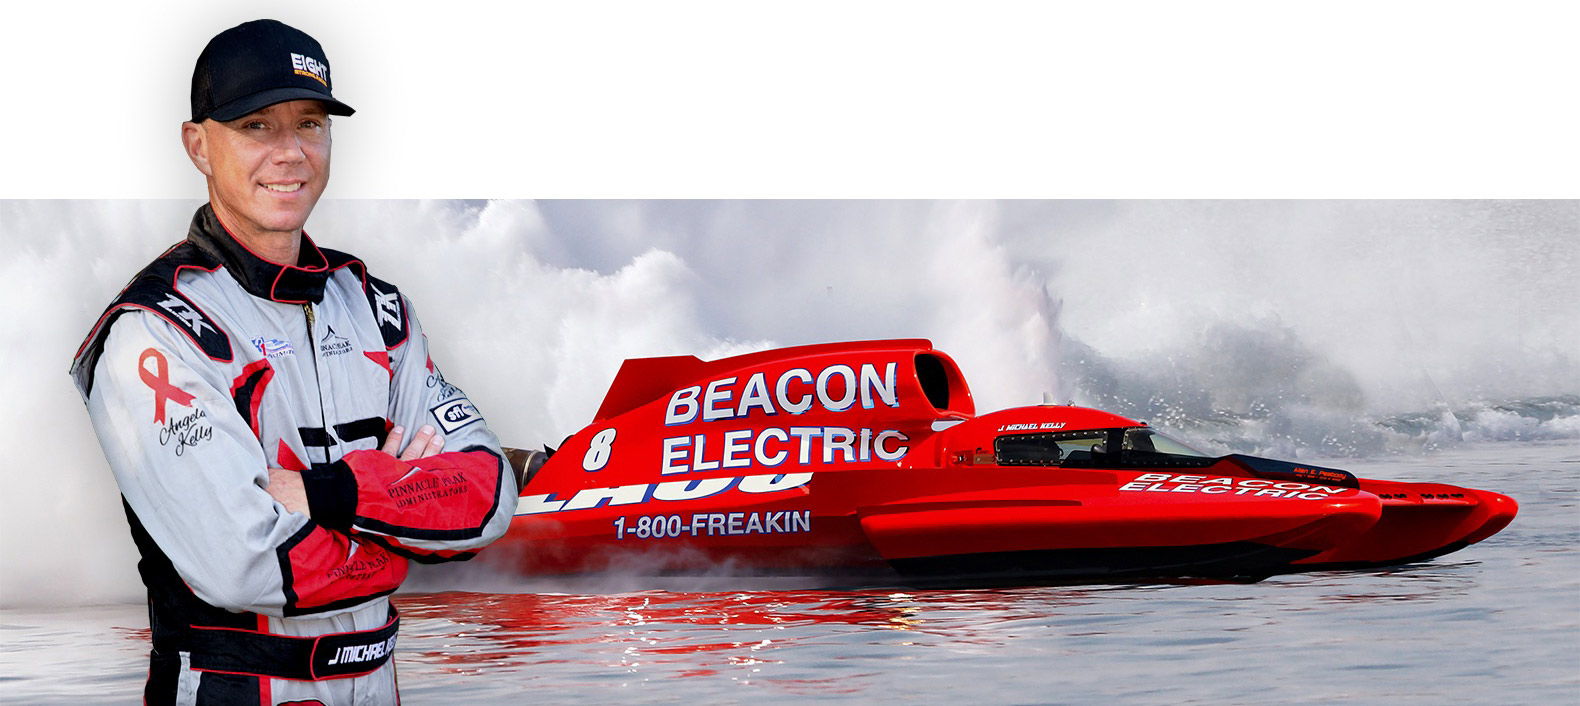 J. Michael Kelly with the Beacon Electric H1